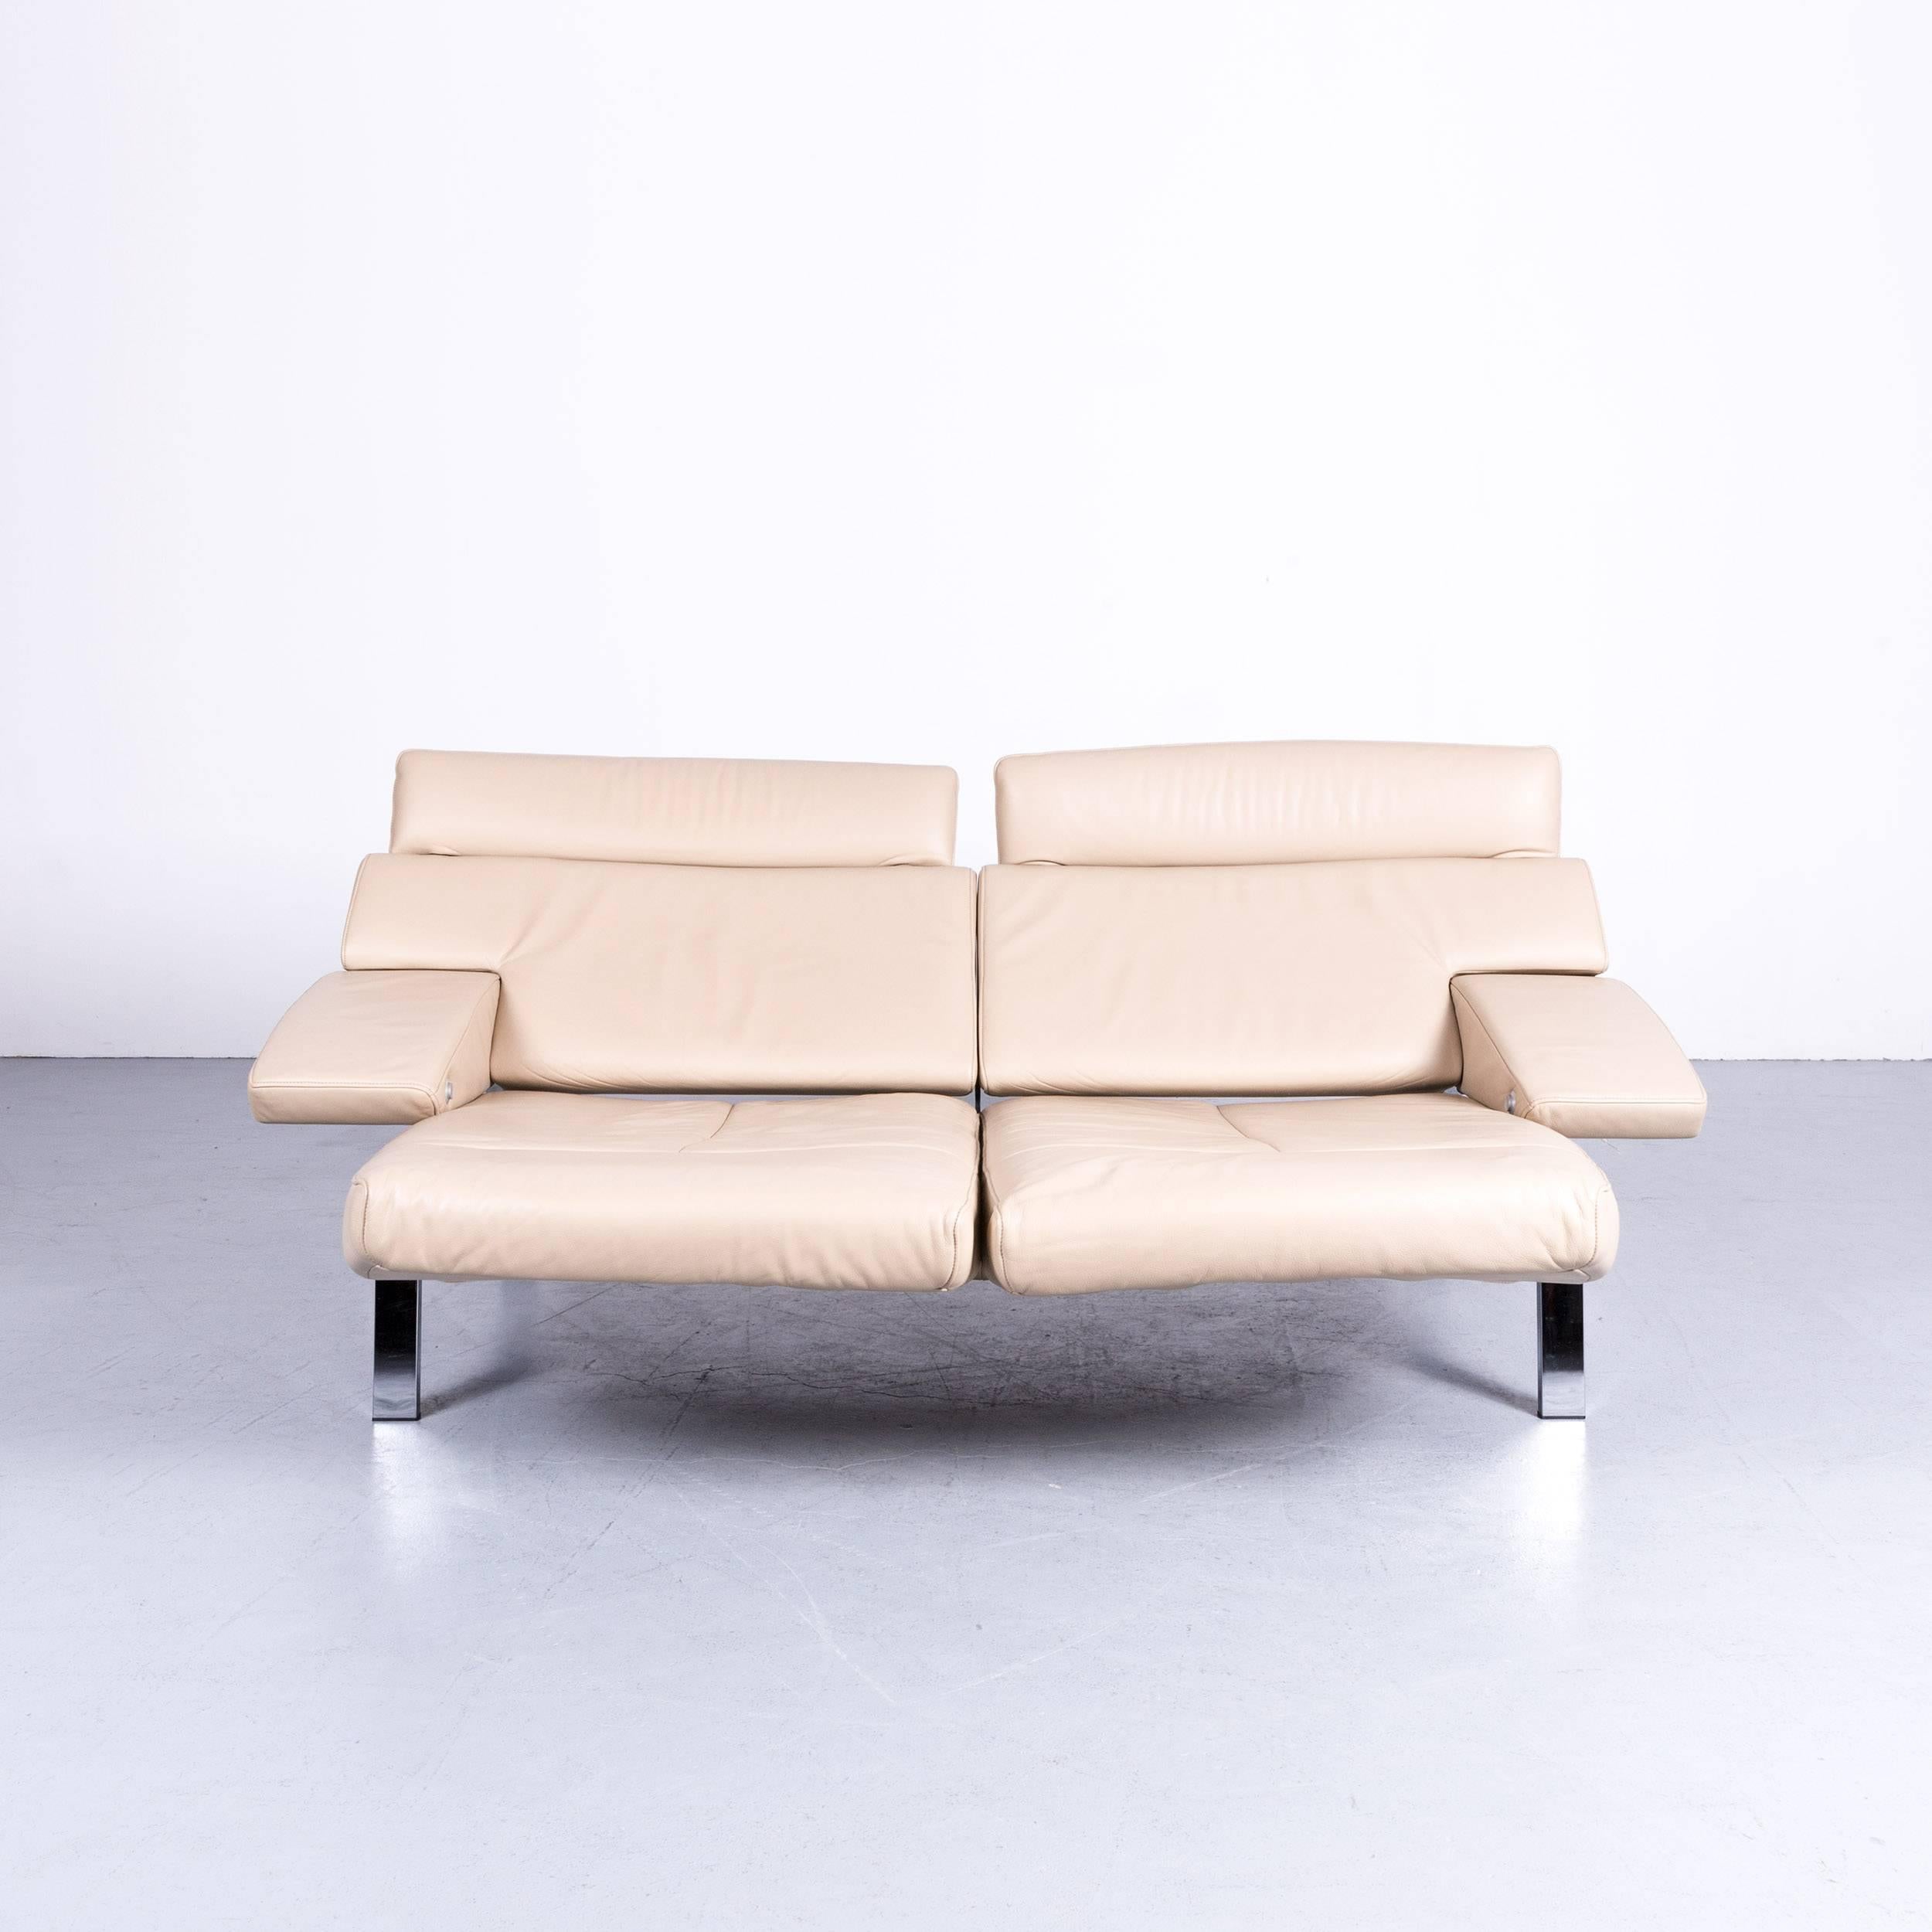 Contemporary De Sede DS 451 Designer Sofa Leather Crème Beige Relax Function Two-Seat Modern